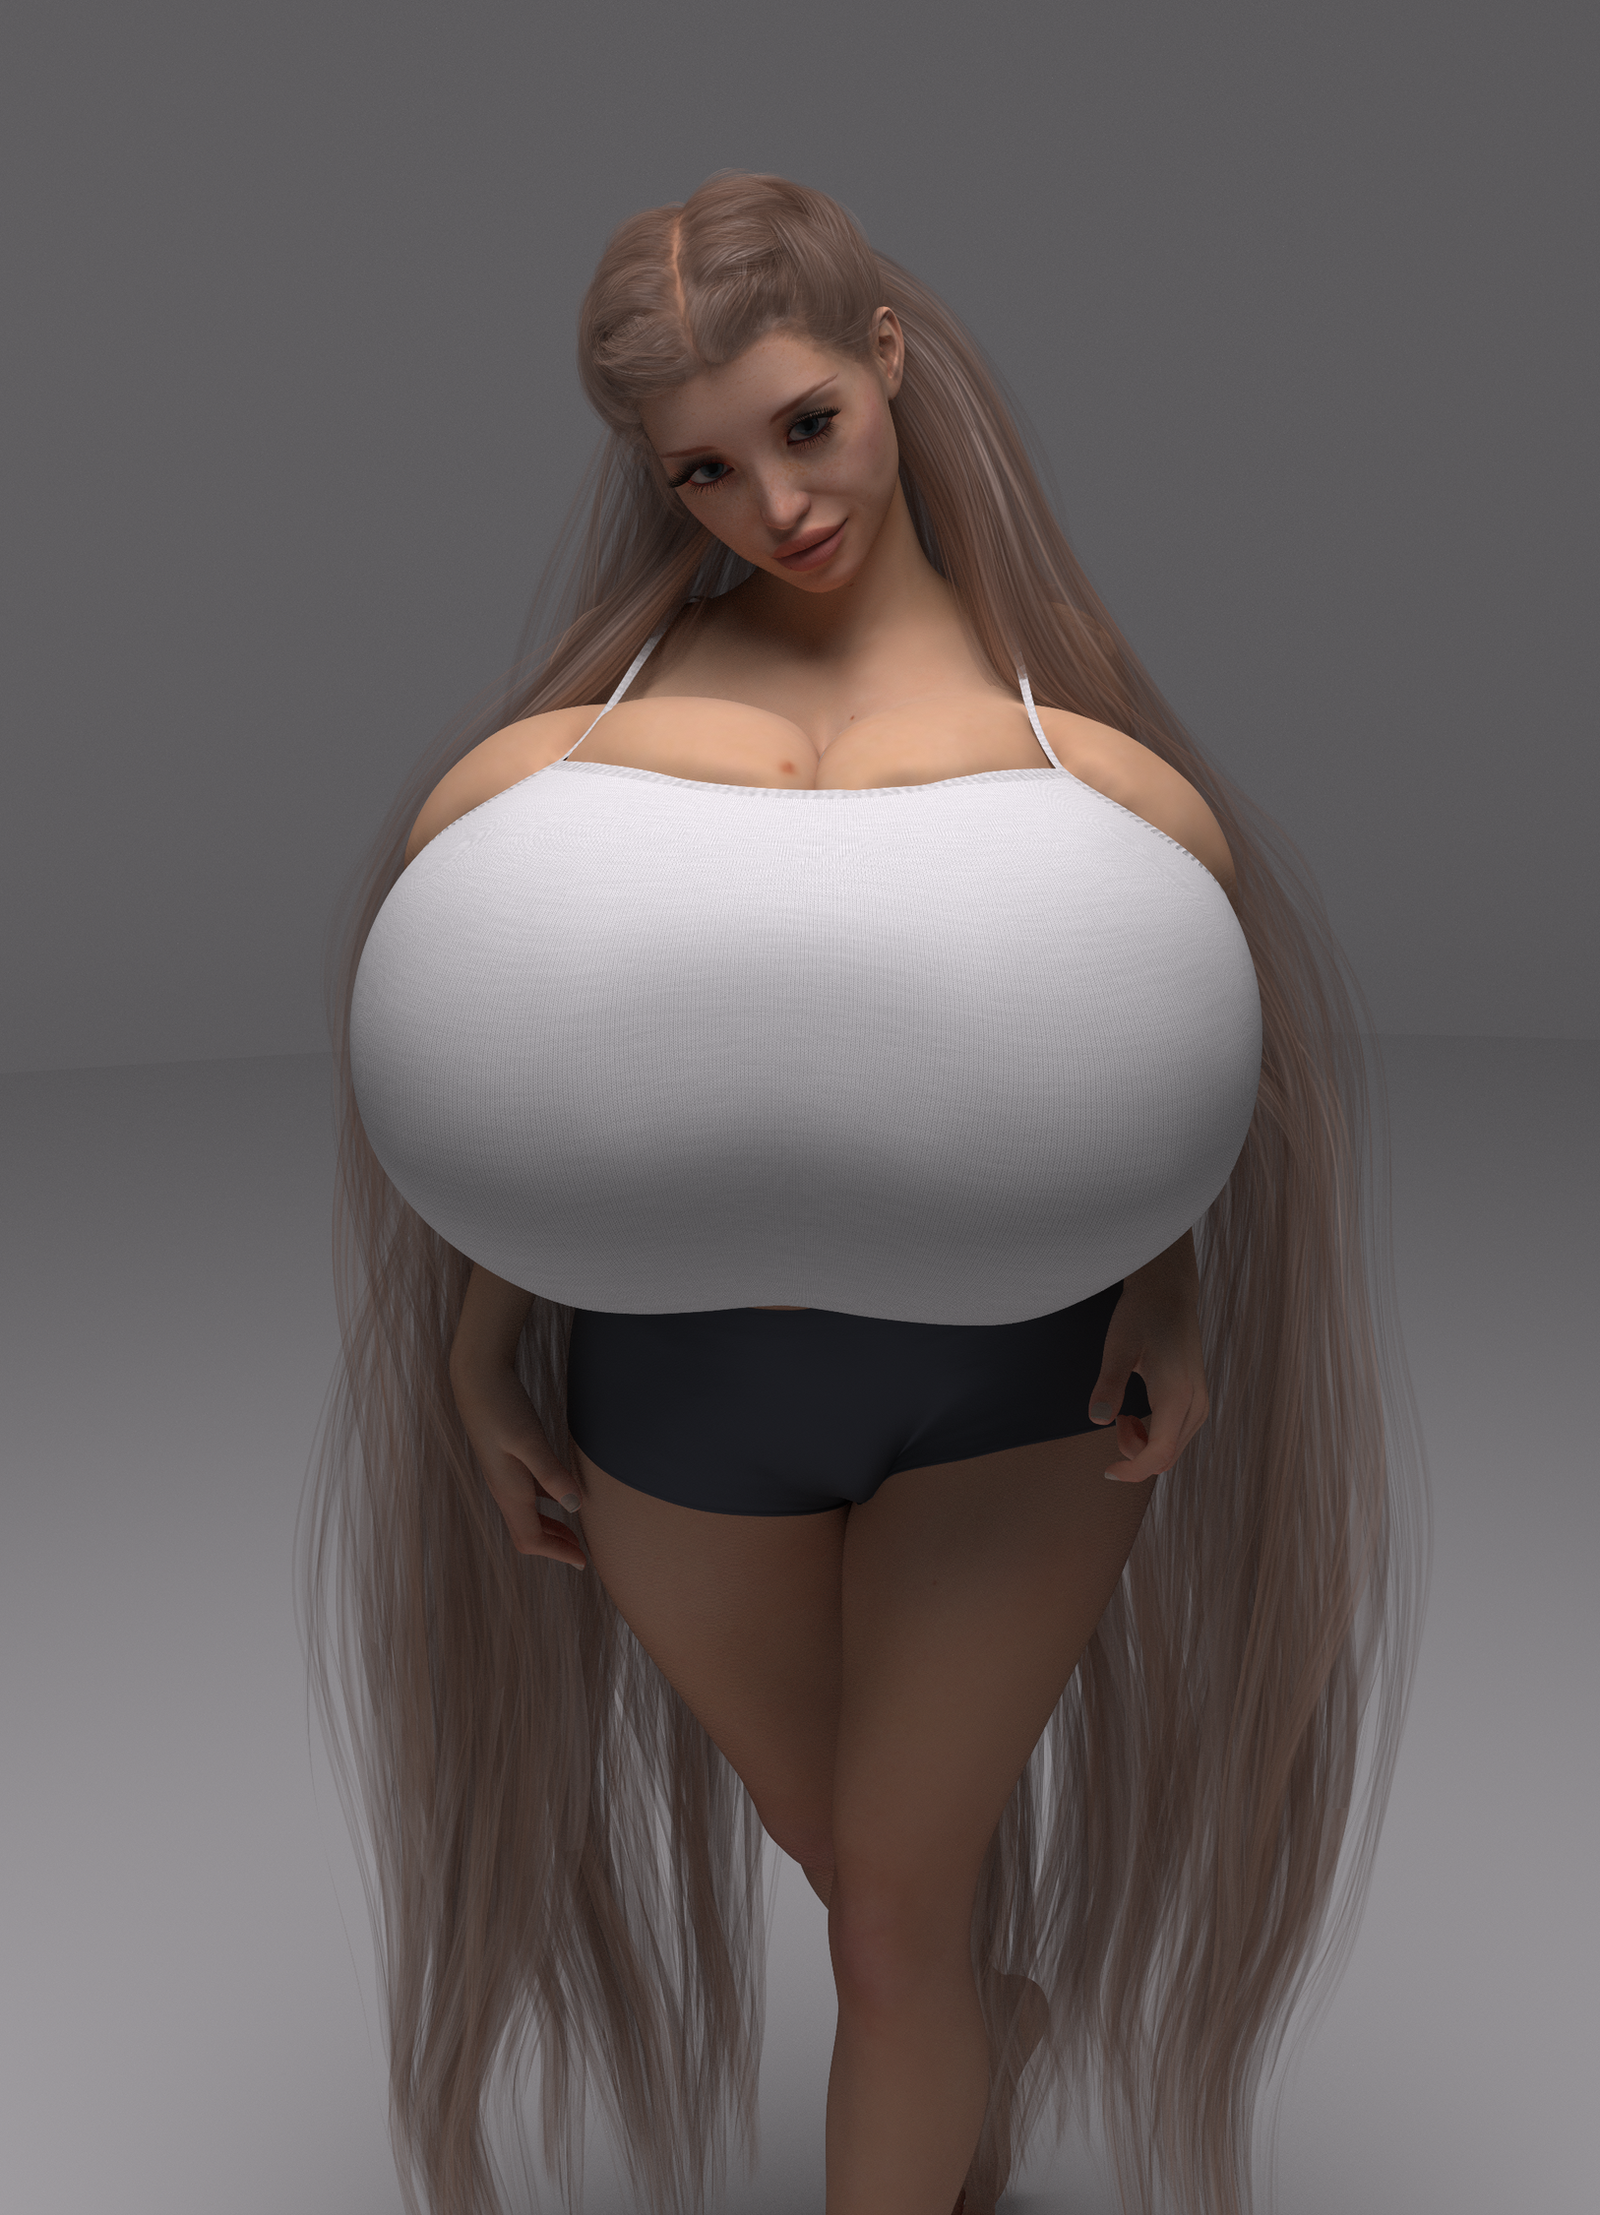 Big Breast Expansion